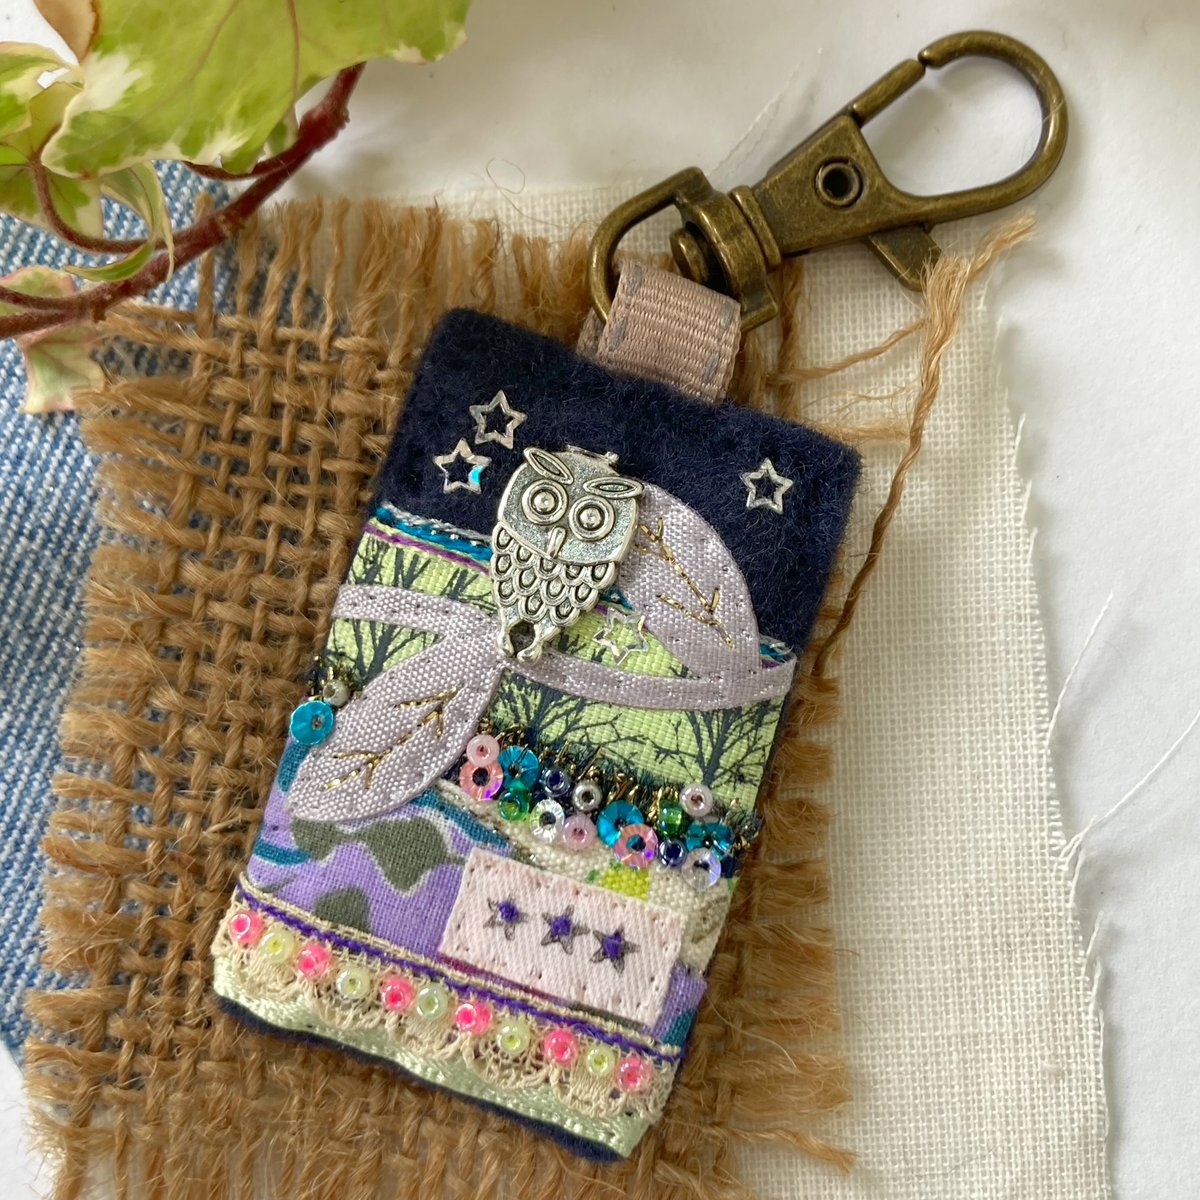 Starry night owl clip accessory, hand sewn from mixed fabrics, trims and embellishments.
Perfect little decorative dangle for keys, bags and spiral bound notebook journals.
elliestreasures.square.site/product/owl-cl…

#mhhsbd #earlybiz #shopindie #UKMakers #CraftBizParty #owls #handsewngifts